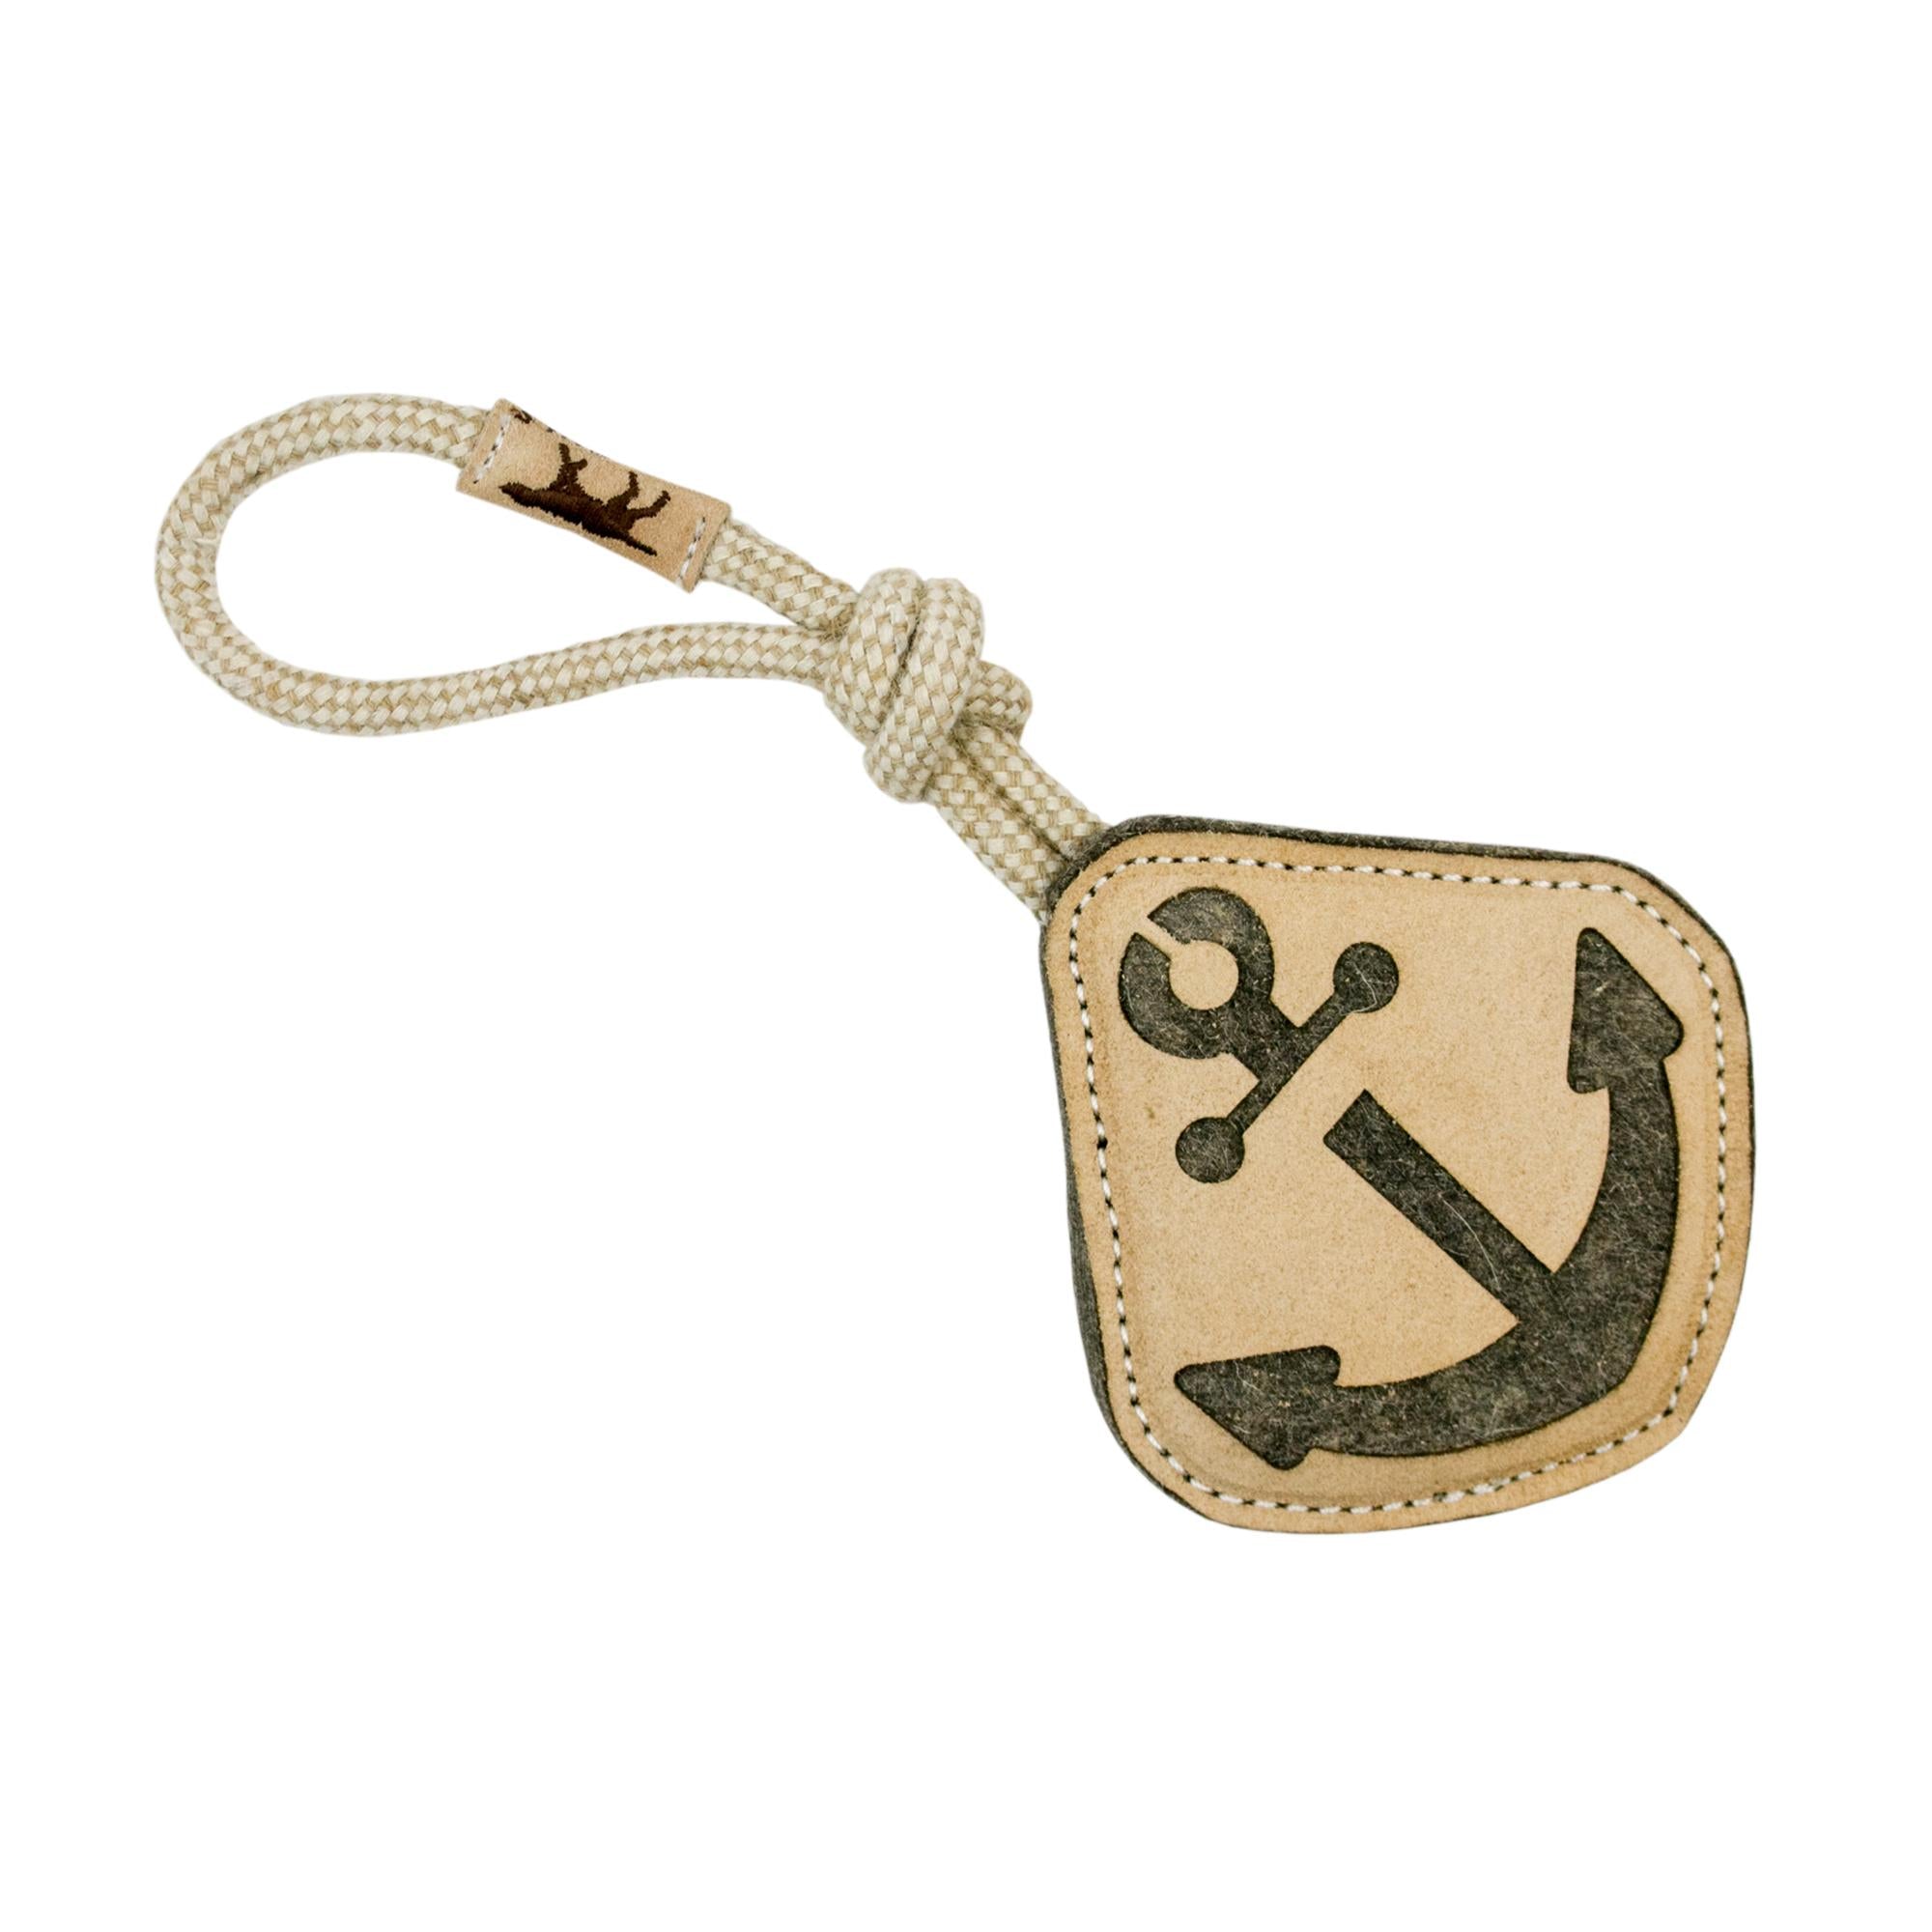 Tall Tails - 14” Anchor Leather Tug